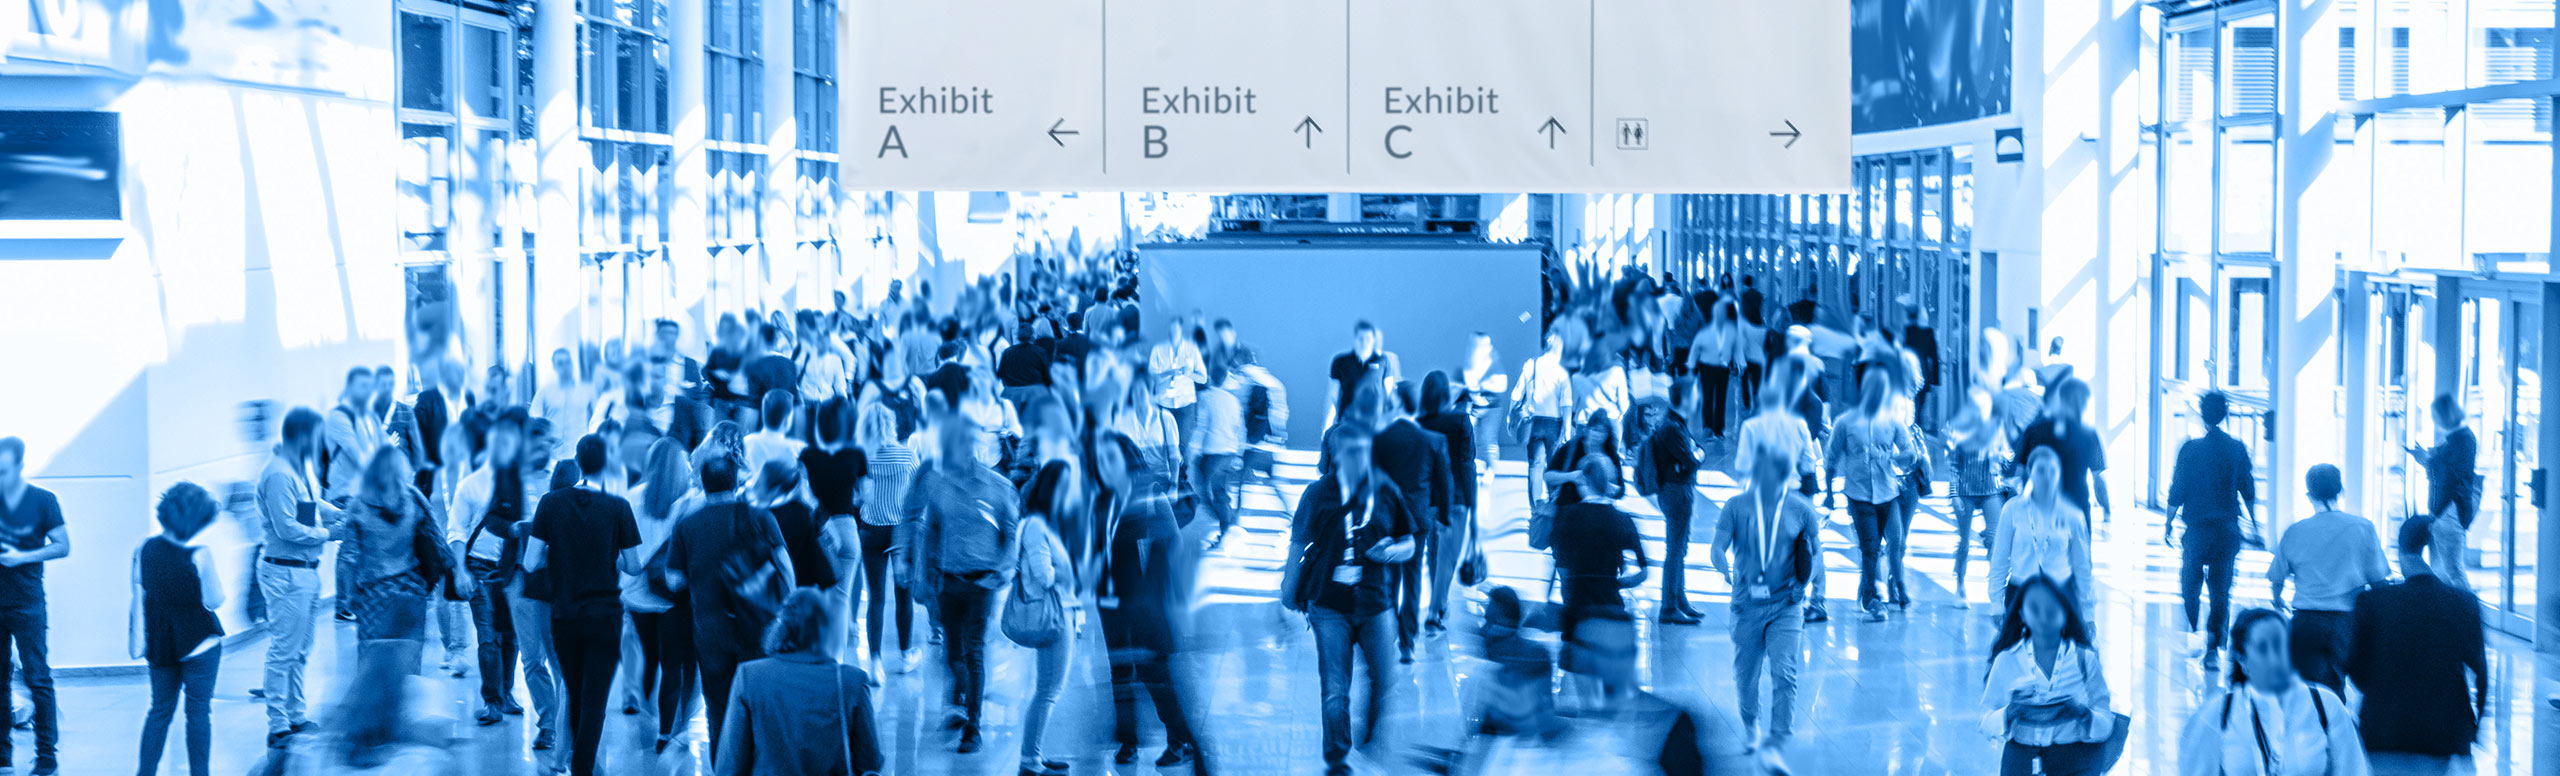 A trade show exhibition hall with lots of people and signage showing direction of different exhibits